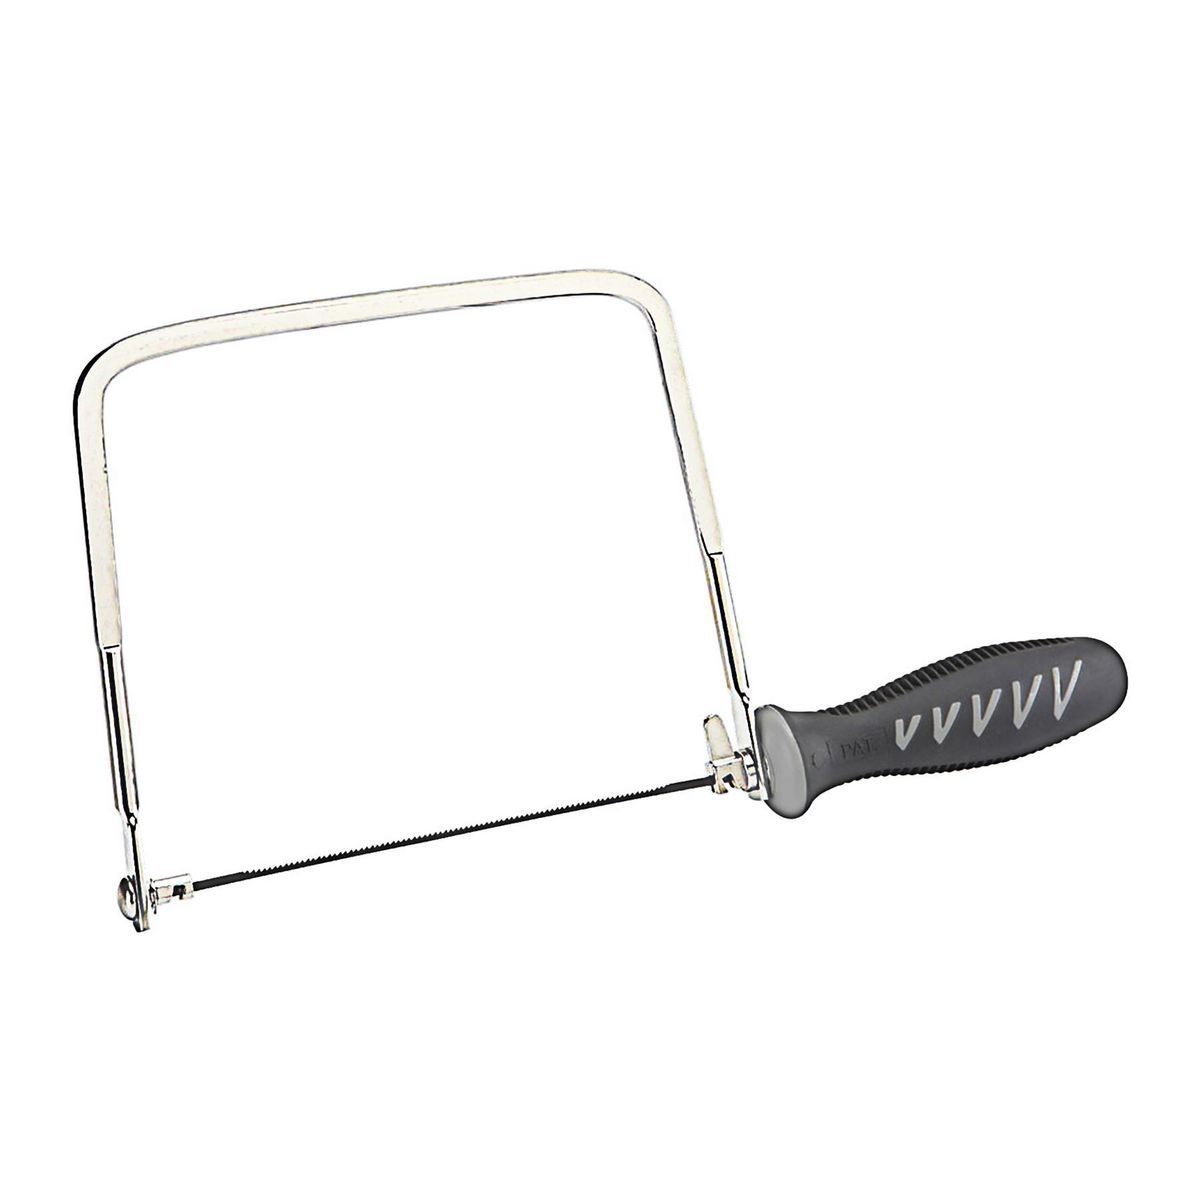 PORTLAND SAW Coping Saw - Save on this 6" Coping Saw